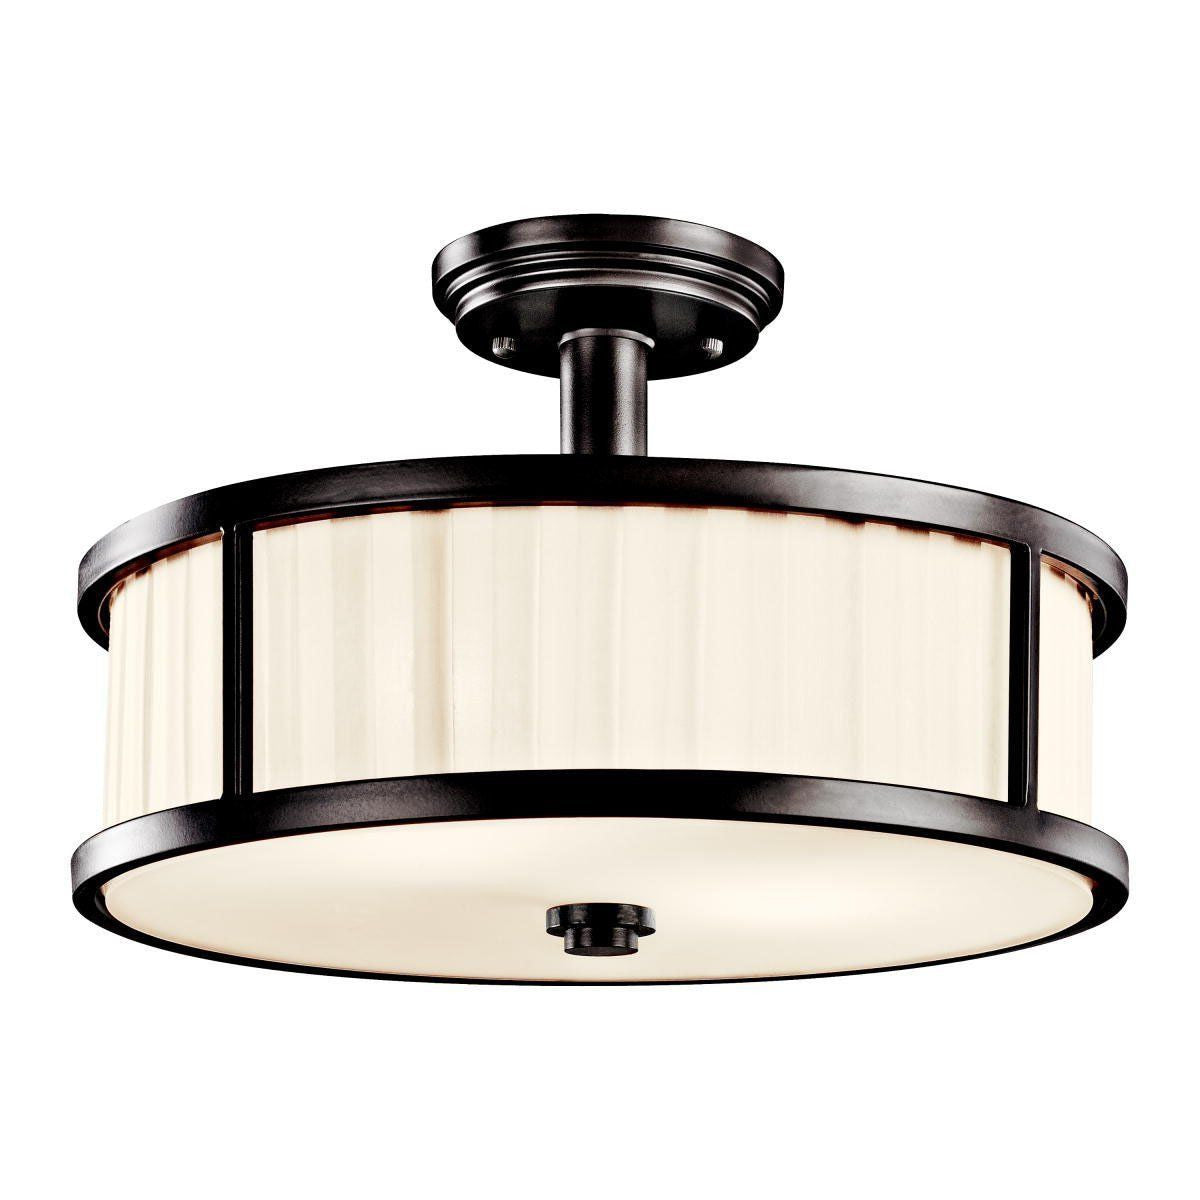 Aztec 38901 by Kichler Lighting Camargo Collection Two Light Semi Flush Ceiling Mount in Olde Bronze Finish